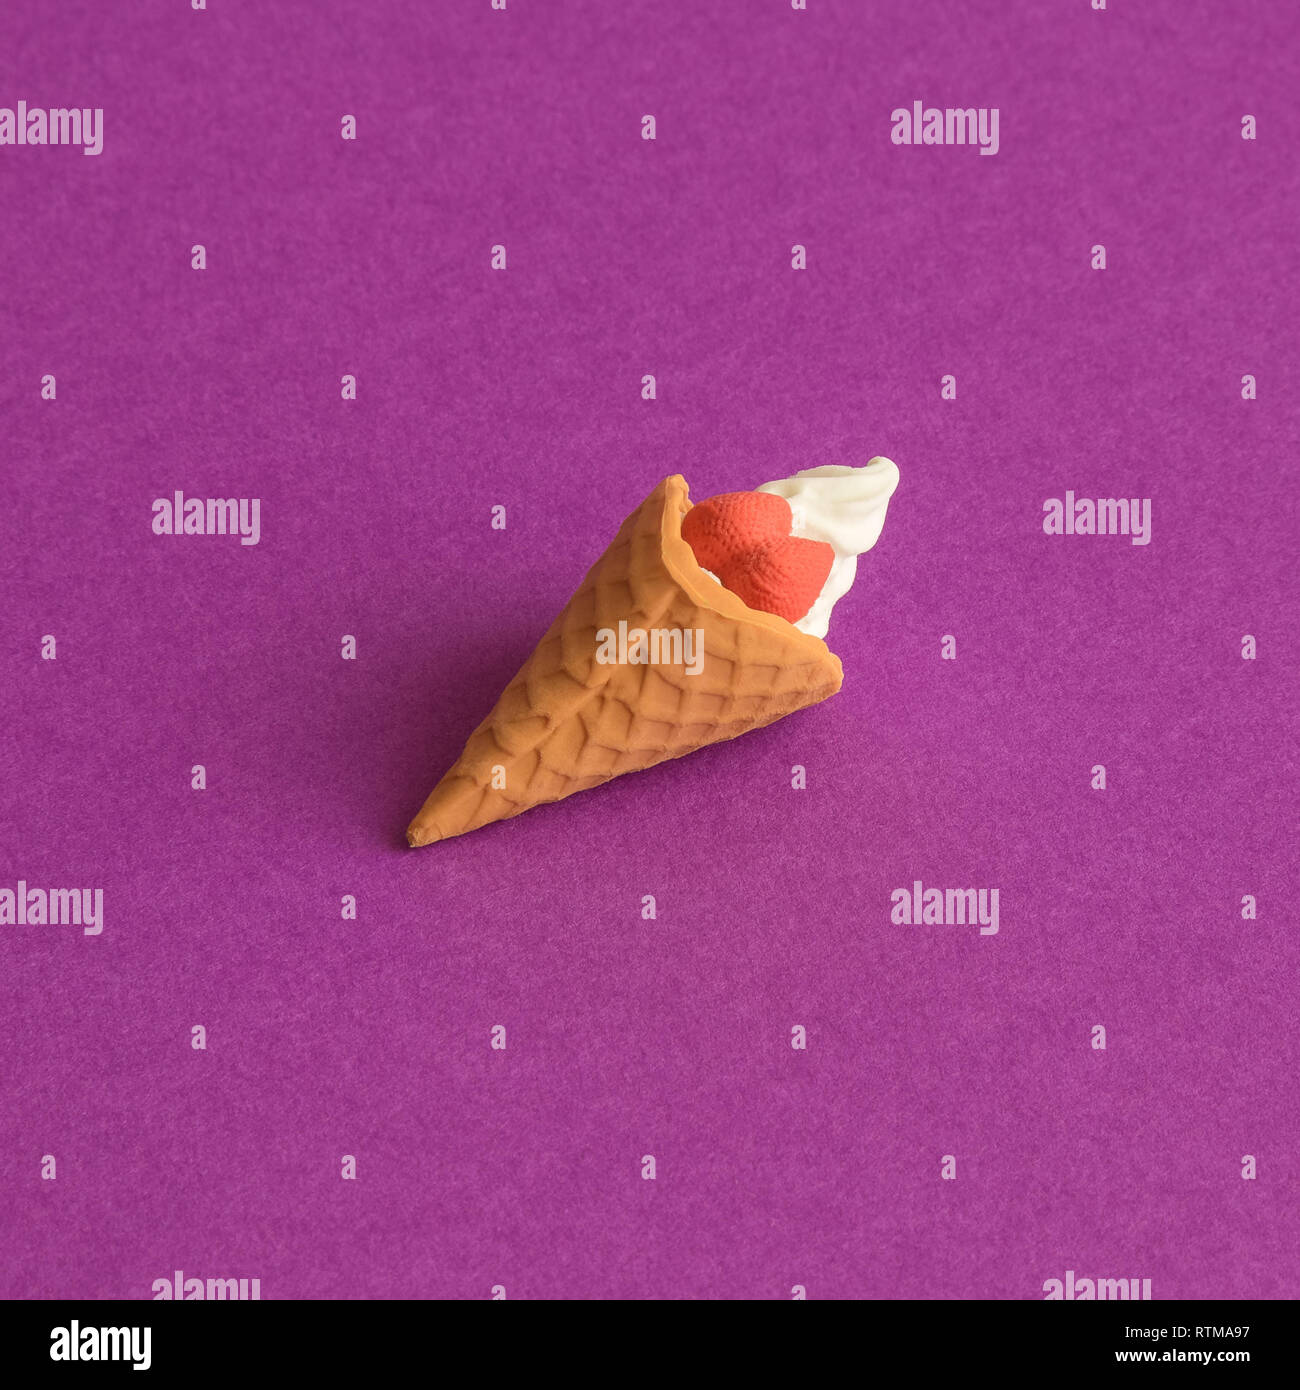 Small ice cream toy abstract on purple background summer and sweet food concept. Stock Photo